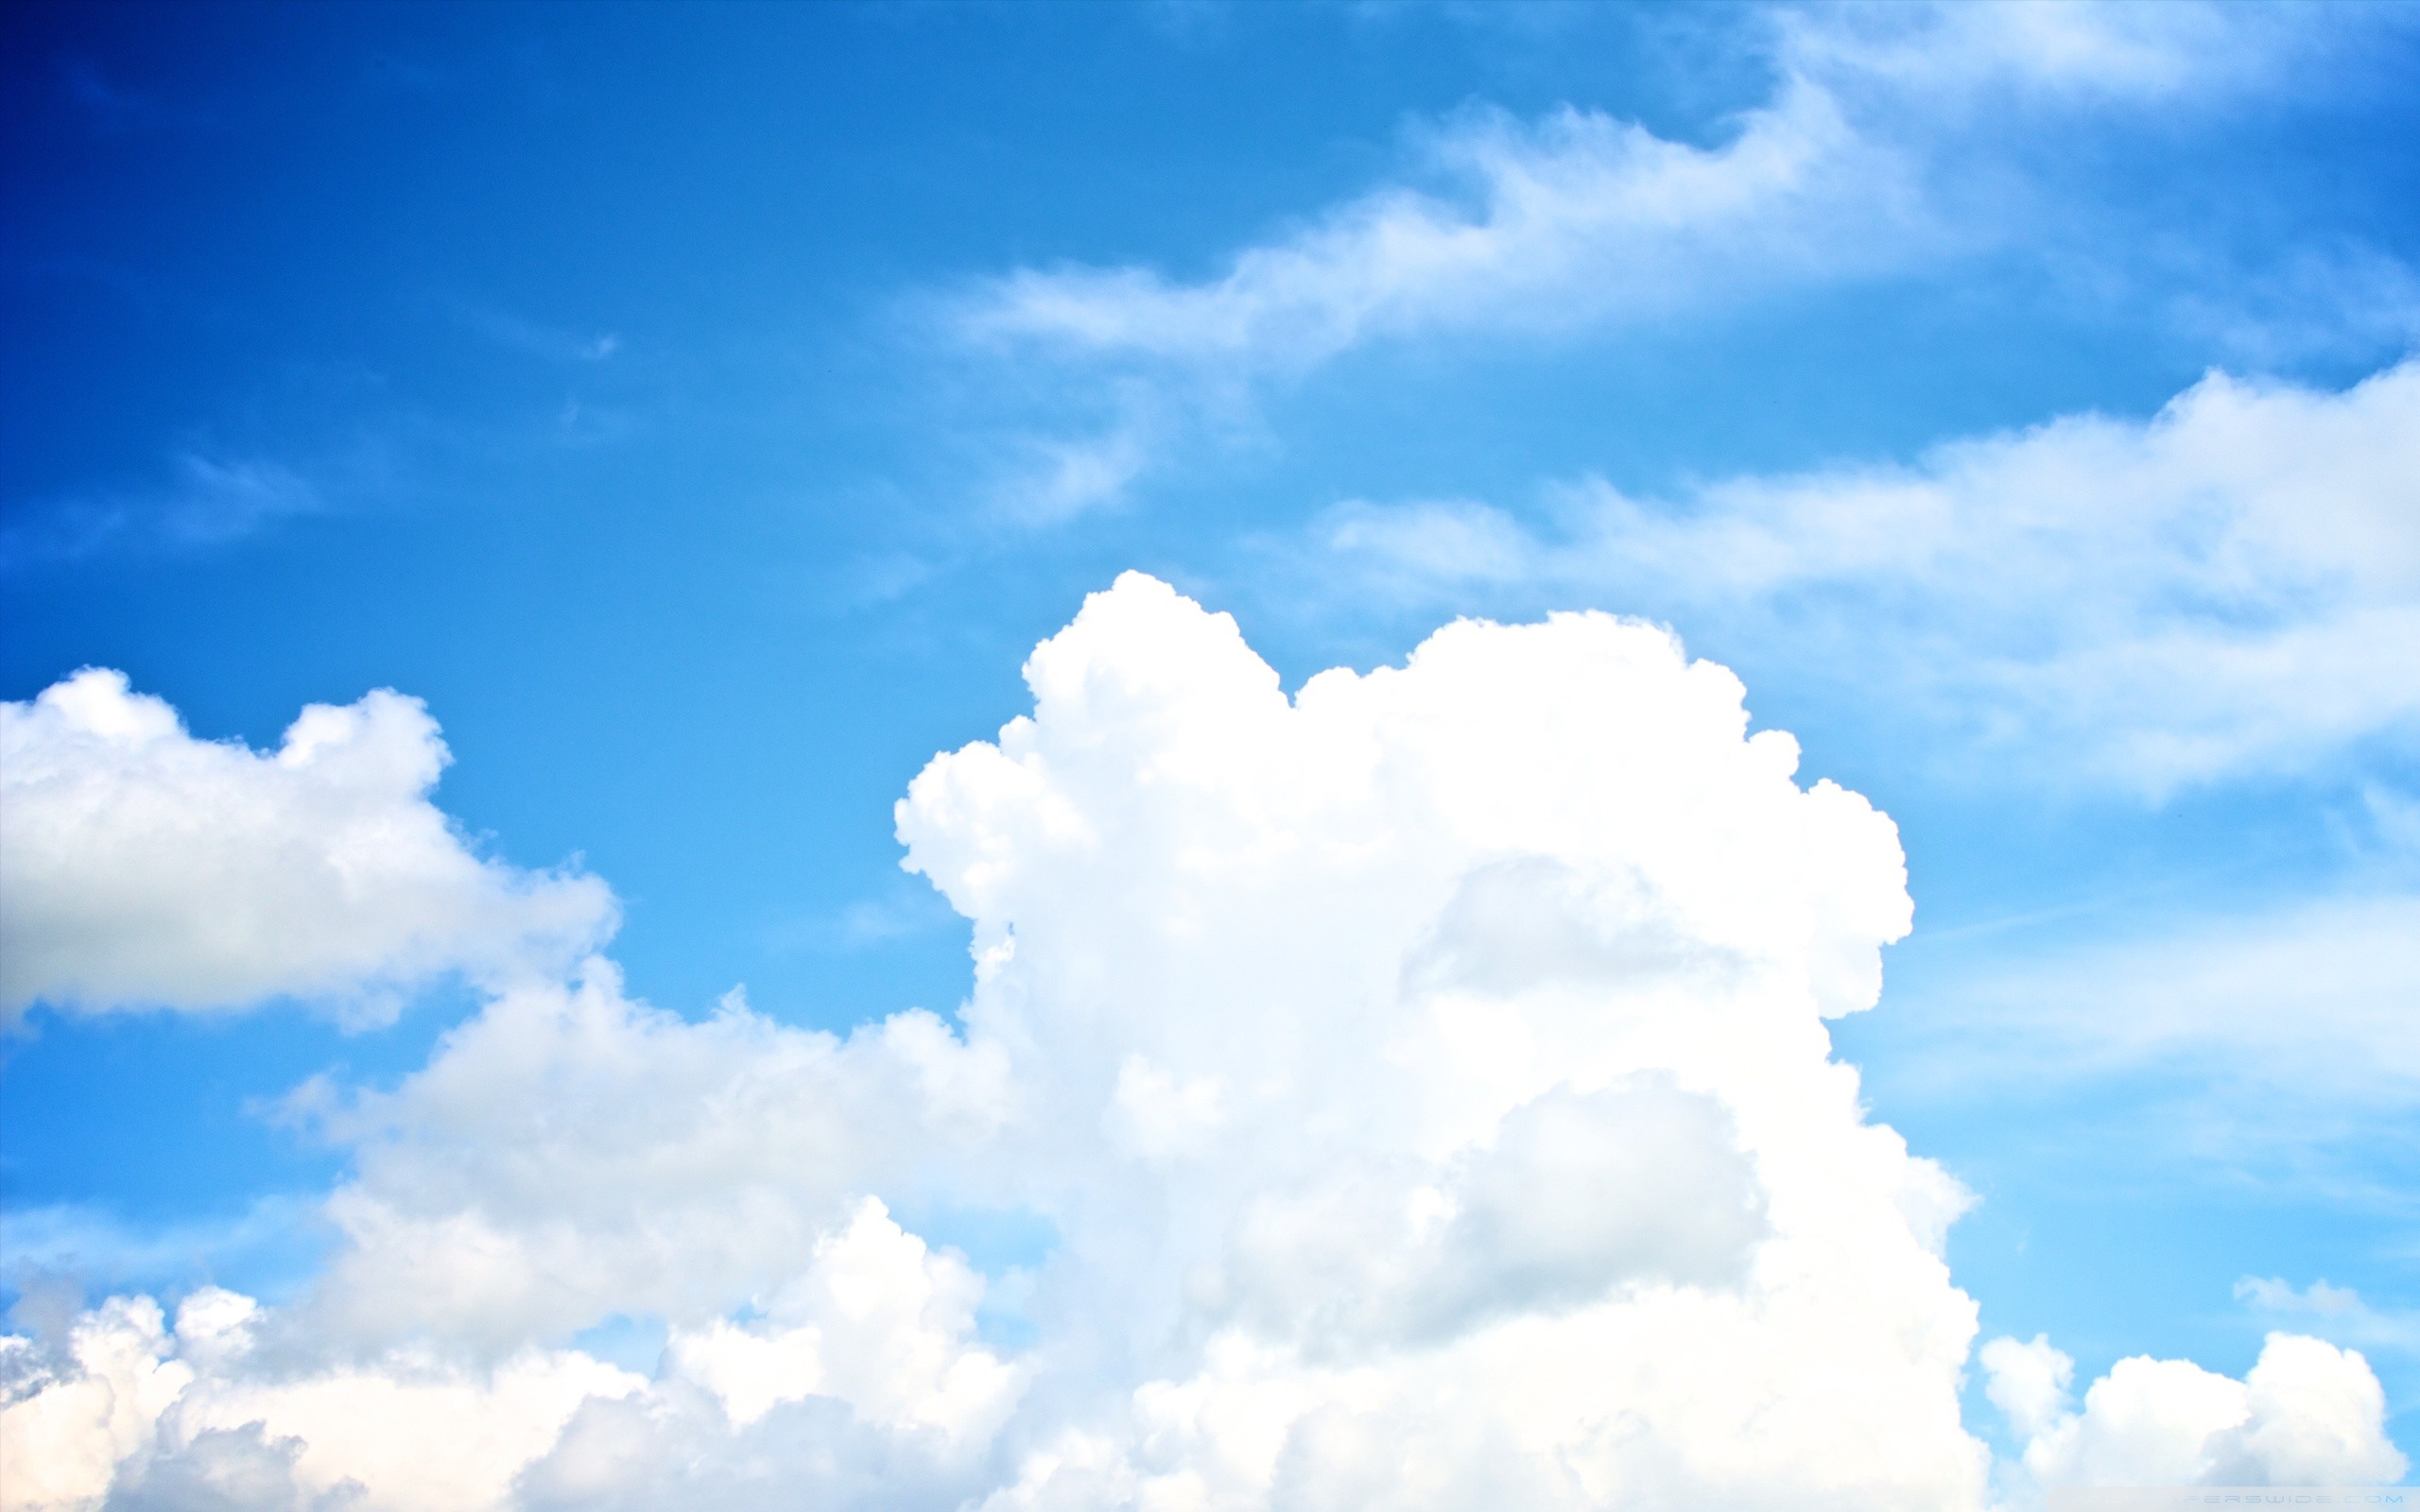 65+ Clouds Hd Wallpapers on WallpaperPlay.